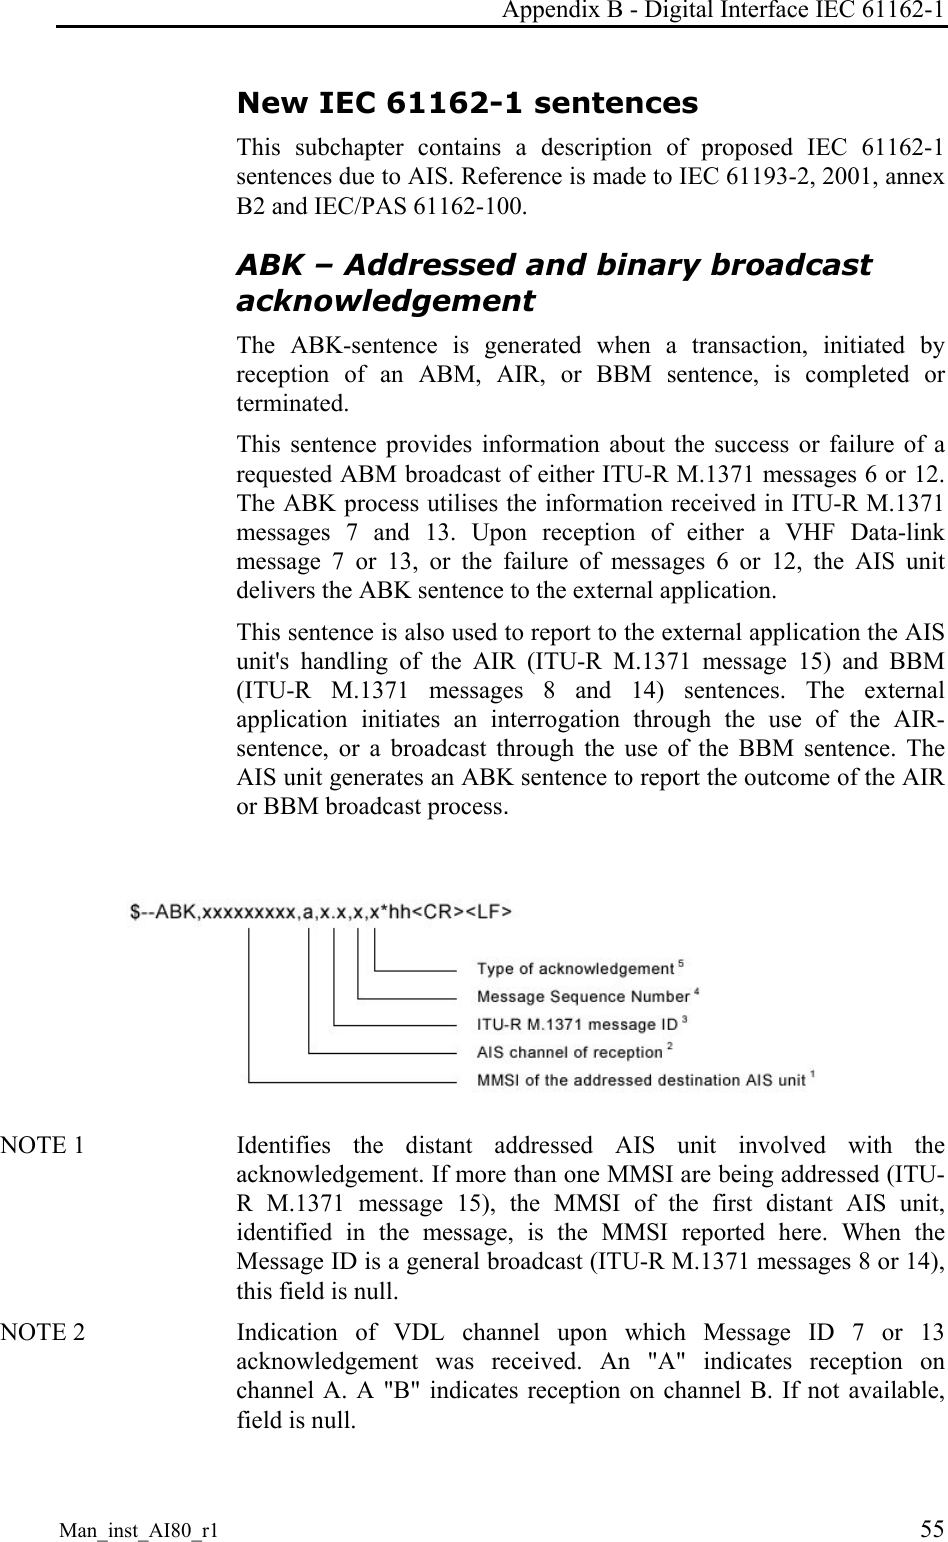 Appendix B - Digital Interface IEC 61162-1 Man_inst_AI80_r1 55 New IEC 61162-1 sentences This subchapter contains a description of proposed IEC 61162-1 sentences due to AIS. Reference is made to IEC 61193-2, 2001, annex B2 and IEC/PAS 61162-100. ABK – Addressed and binary broadcast acknowledgement The ABK-sentence is generated when a transaction, initiated by reception of an ABM, AIR, or BBM sentence, is completed or terminated.  This sentence provides information about the success or failure of a requested ABM broadcast of either ITU-R M.1371 messages 6 or 12. The ABK process utilises the information received in ITU-R M.1371 messages 7 and 13. Upon reception of either a VHF Data-link message 7 or 13, or the failure of messages 6 or 12, the AIS unit delivers the ABK sentence to the external application.  This sentence is also used to report to the external application the AIS unit&apos;s handling of the AIR (ITU-R M.1371 message 15) and BBM (ITU-R M.1371 messages 8 and 14) sentences. The external application initiates an interrogation through the use of the AIR-sentence, or a broadcast through the use of the BBM sentence. The AIS unit generates an ABK sentence to report the outcome of the AIR or BBM broadcast process.   NOTE 1   Identifies the distant addressed AIS unit involved with the acknowledgement. If more than one MMSI are being addressed (ITU-R M.1371 message 15), the MMSI of the first distant AIS unit, identified in the message, is the MMSI reported here. When the Message ID is a general broadcast (ITU-R M.1371 messages 8 or 14), this field is null. NOTE 2   Indication of VDL channel upon which Message ID 7 or 13 acknowledgement was received. An &quot;A&quot; indicates reception on channel A. A &quot;B&quot; indicates reception on channel B. If not available, field is null. 